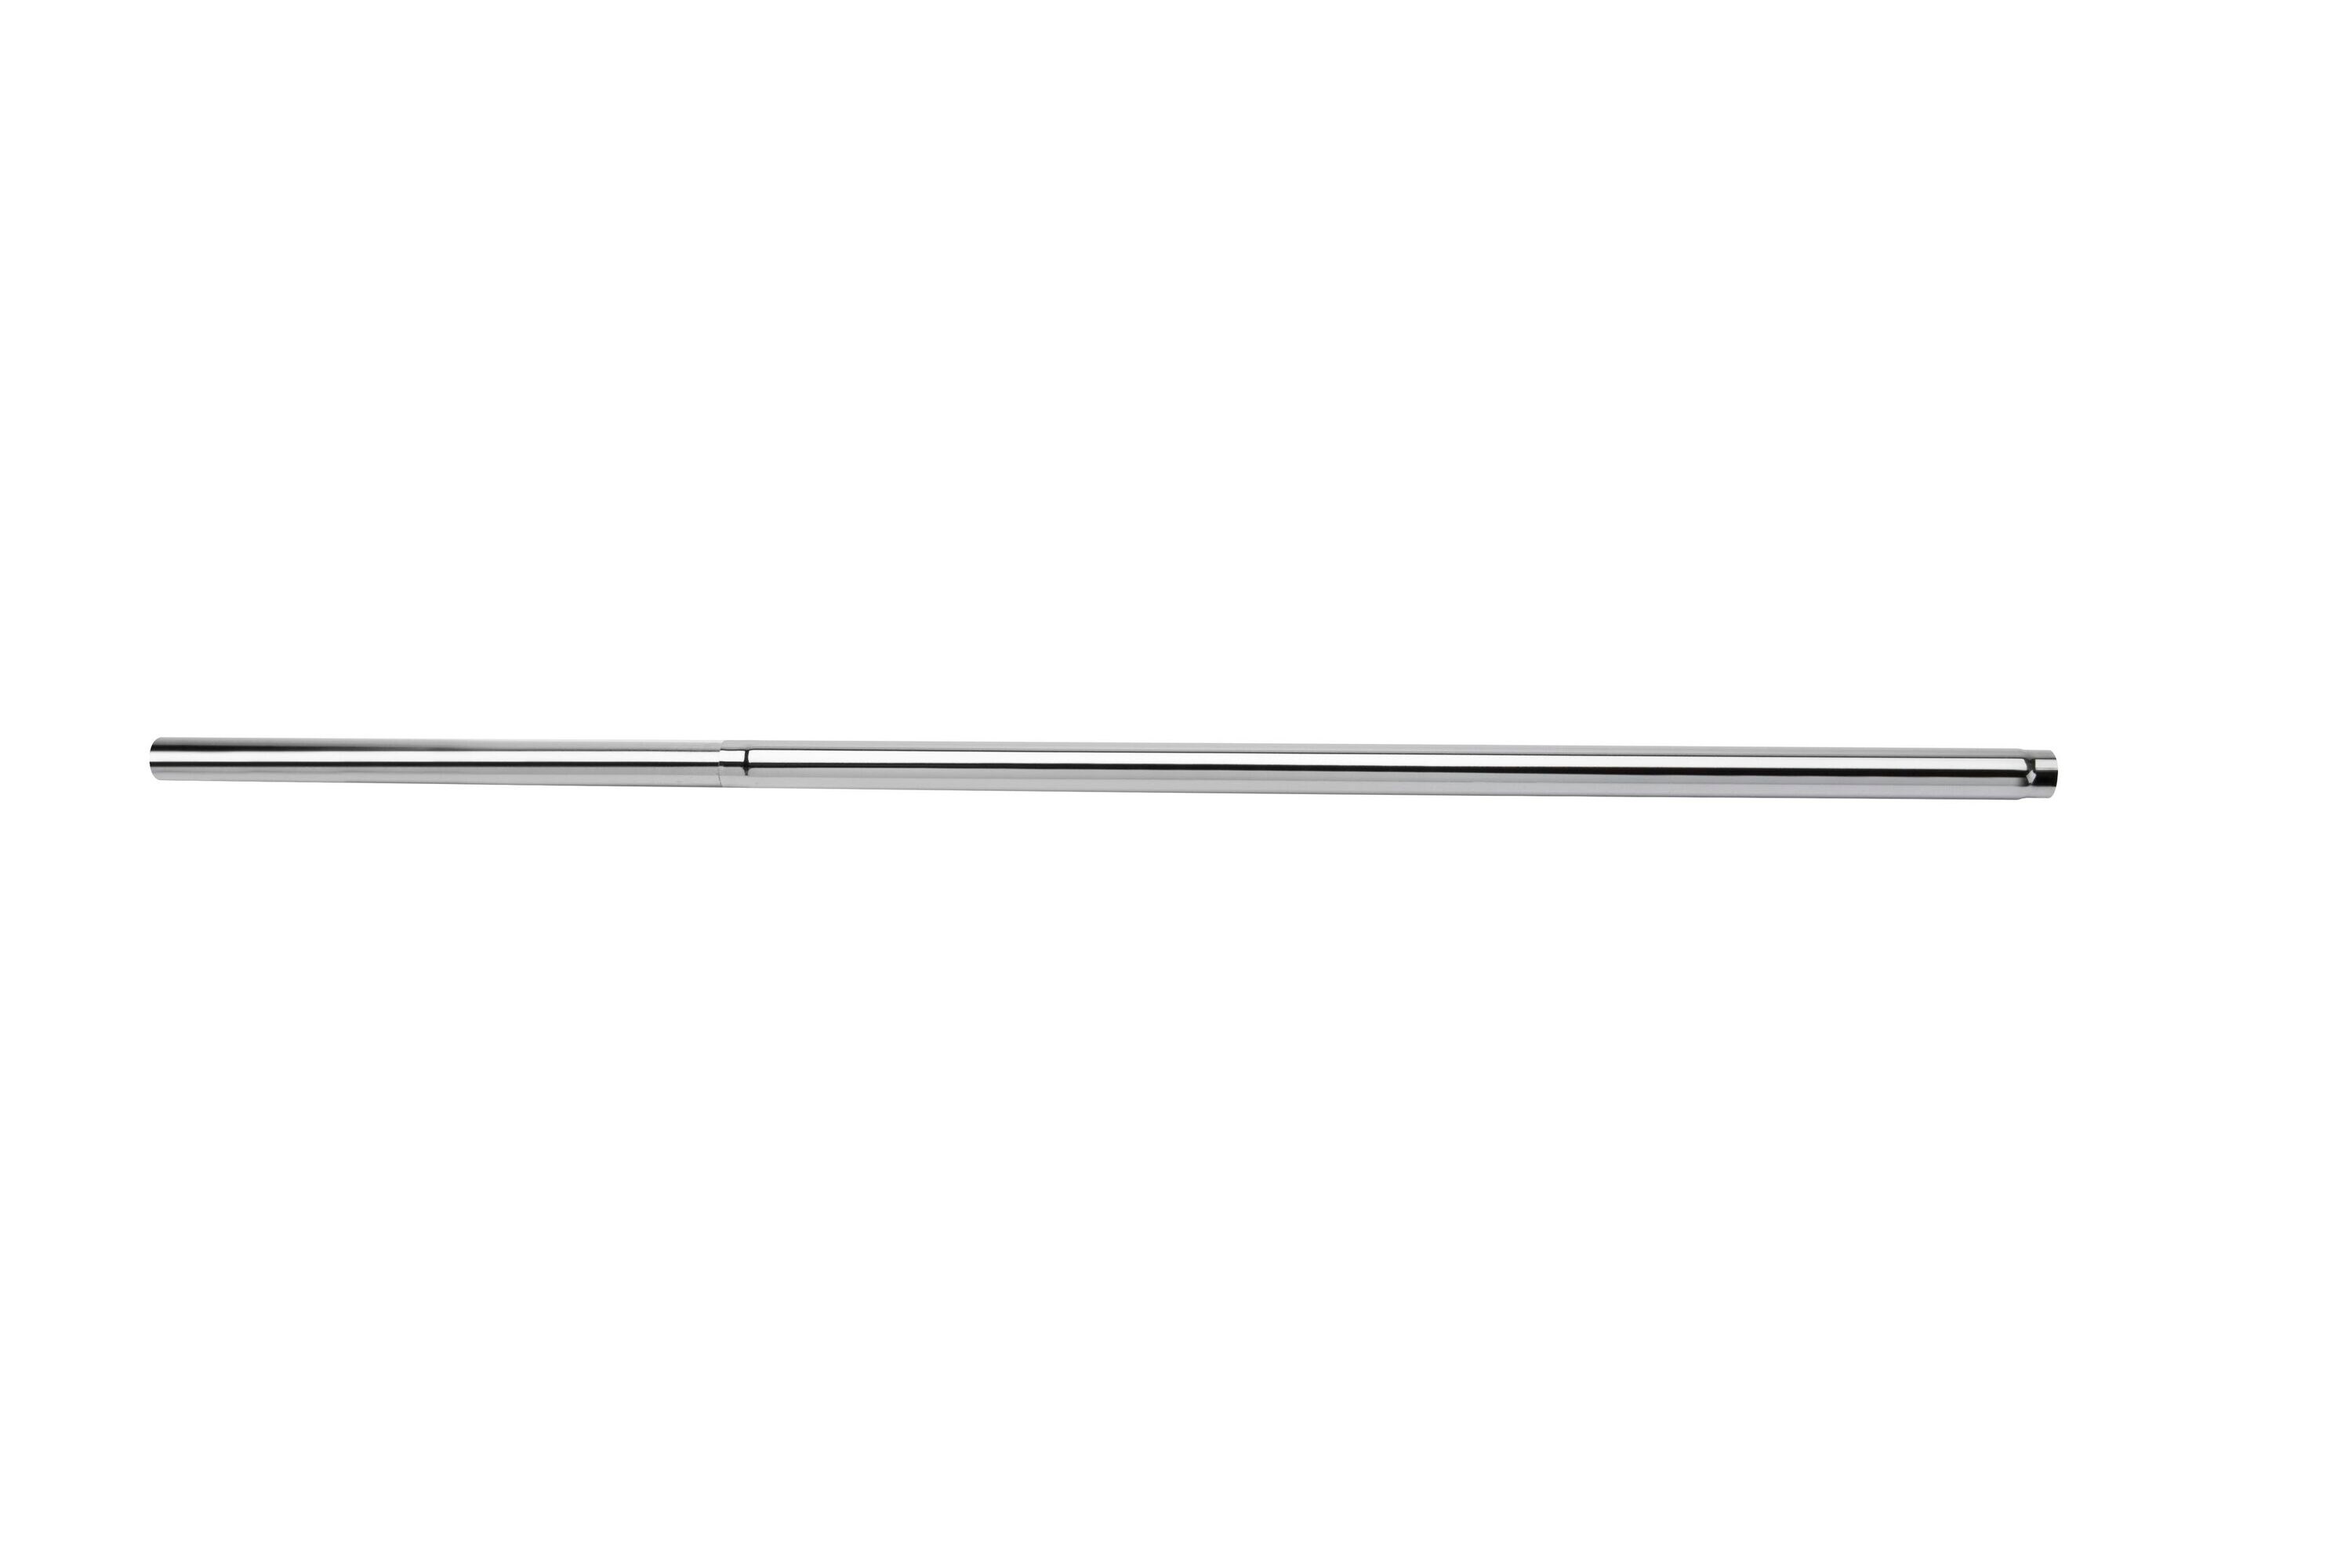 Rubbermaid FastTrack 14.271-in x 8-in x 1.233-in Satin Nickel Steel Valet  Rod in the Wire Closet Accessories department at